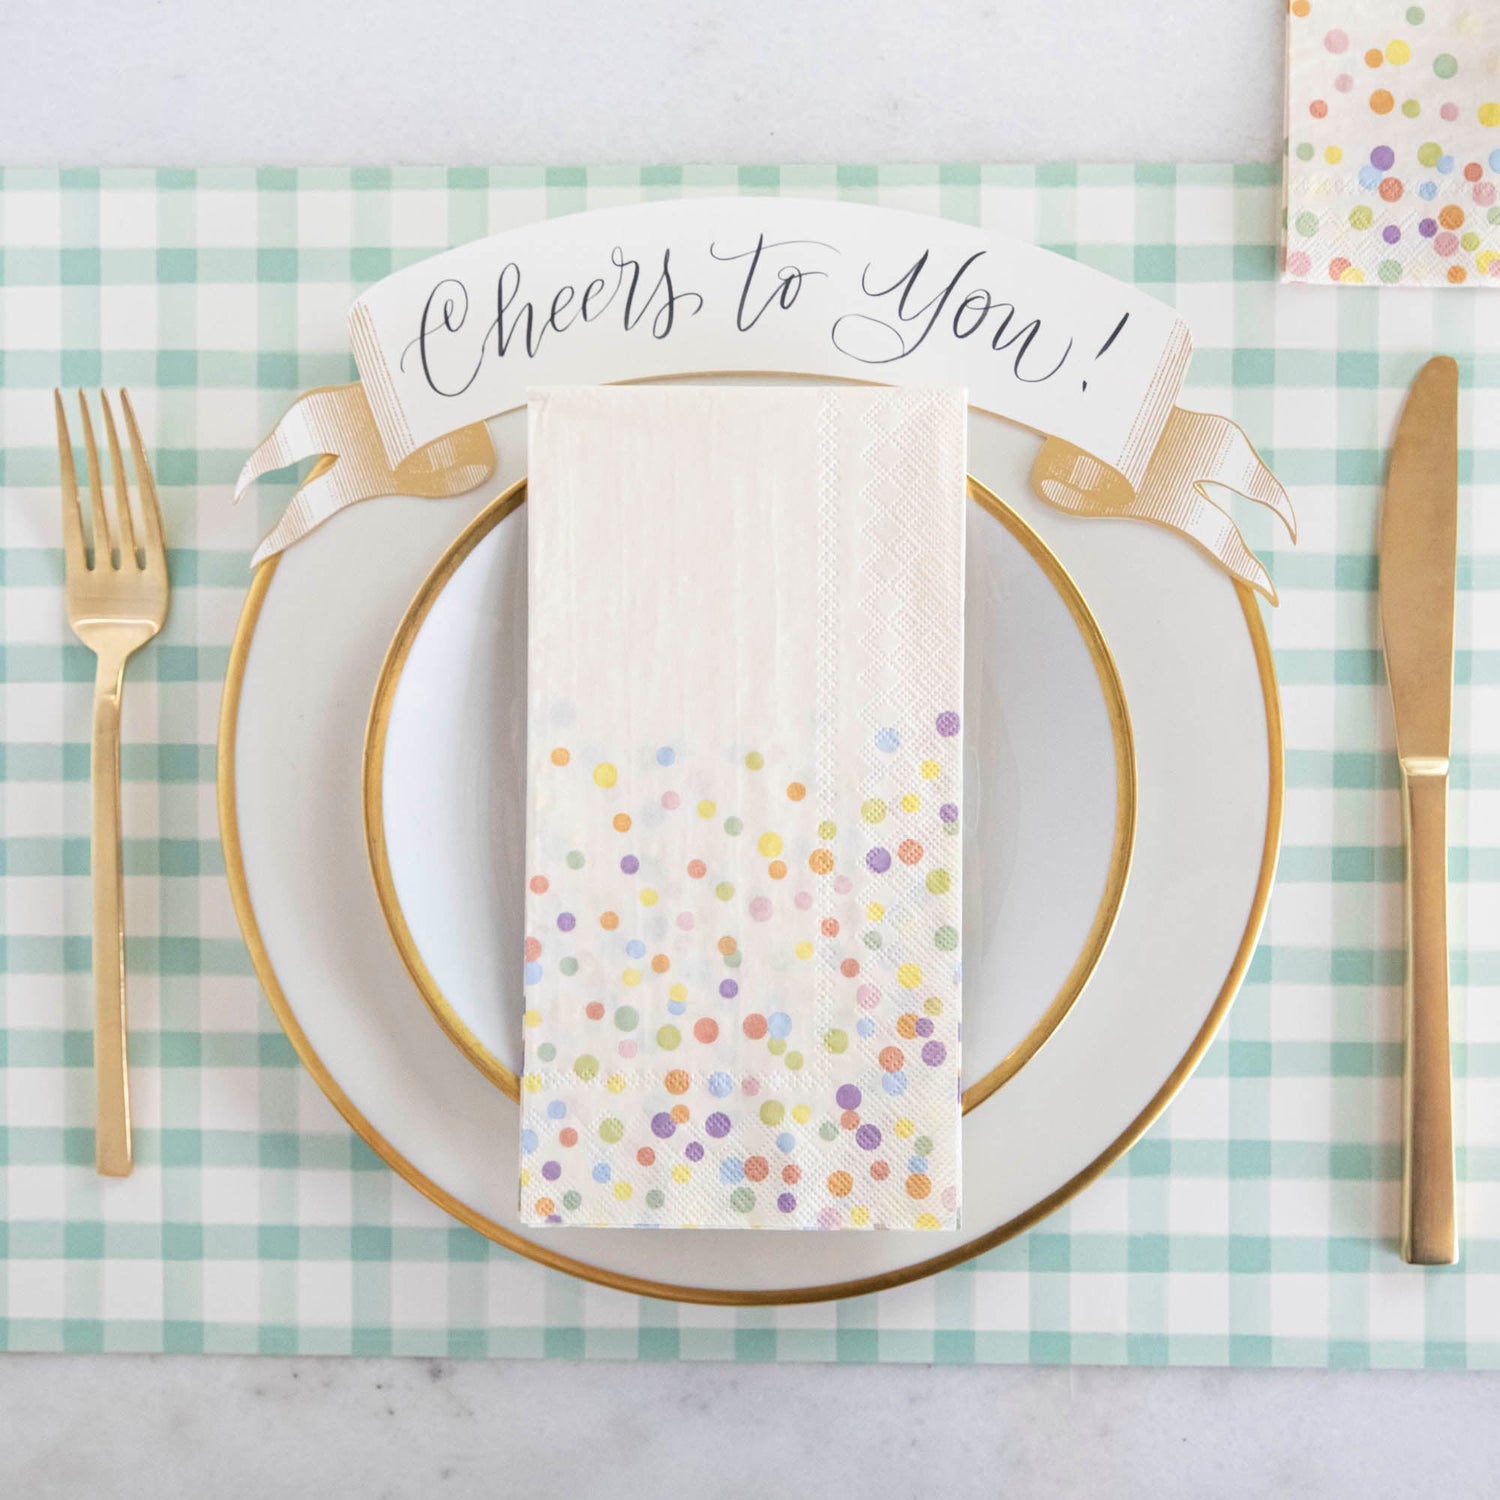 A Confetti Sprinkles Guest Napkin centered on a plate in a festive place setting, from above.